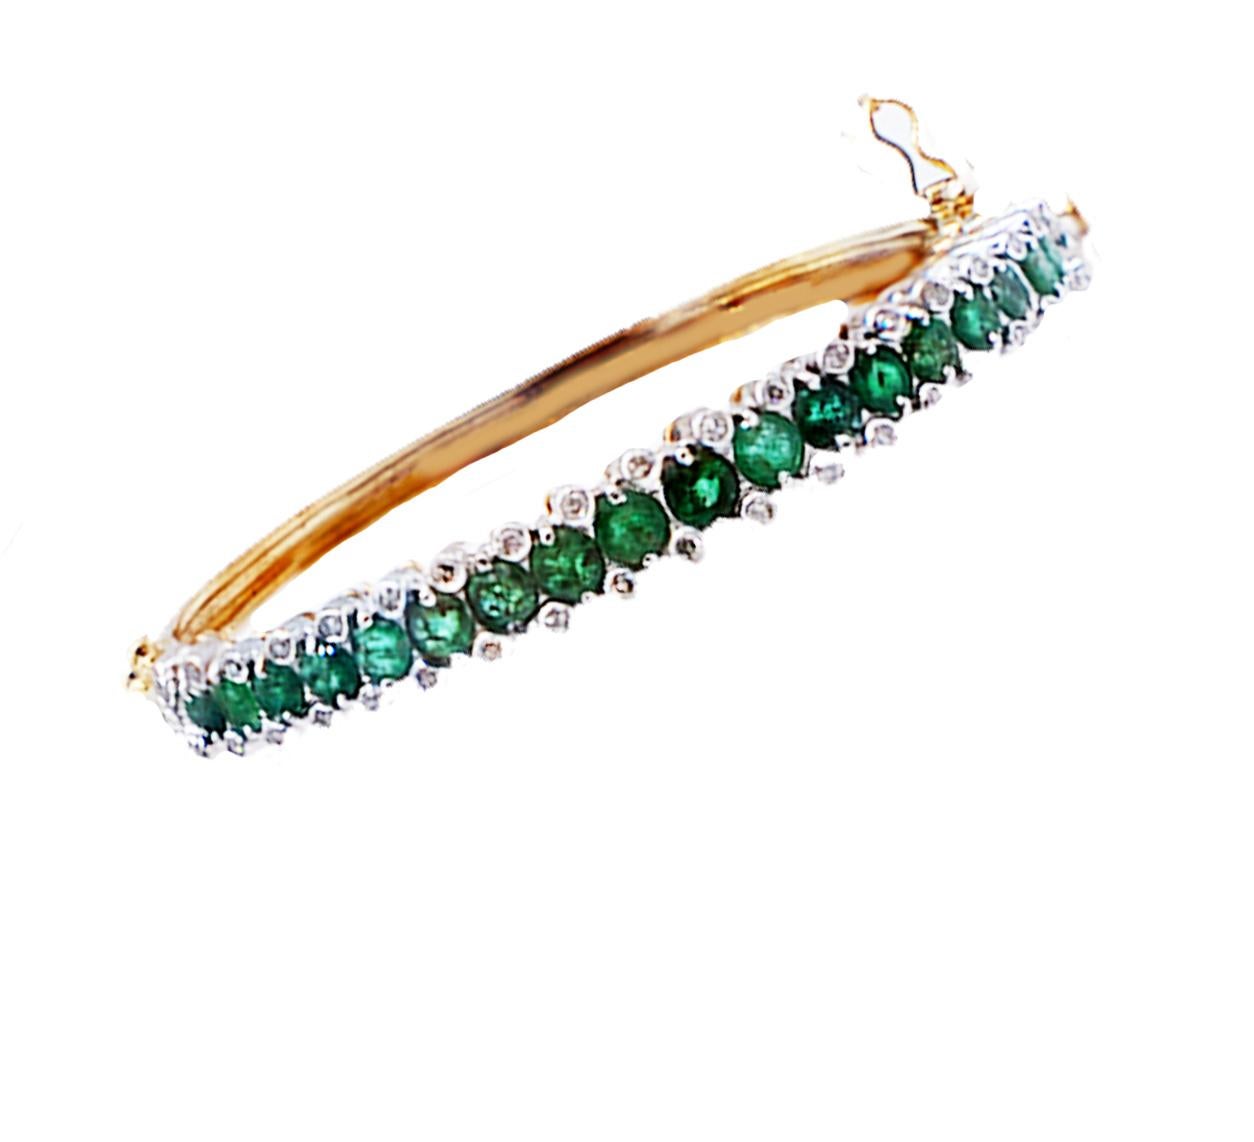 Vintage 1950's Emerald Diamond Bangle Bracelet, 14 Karat Yellow Gold with 18- round emerald stones accented with diamonds and set in platinum.
The under-cage gallery of the gemstones and the bangle are made of 14 karat yellow gold. Secure clasp with